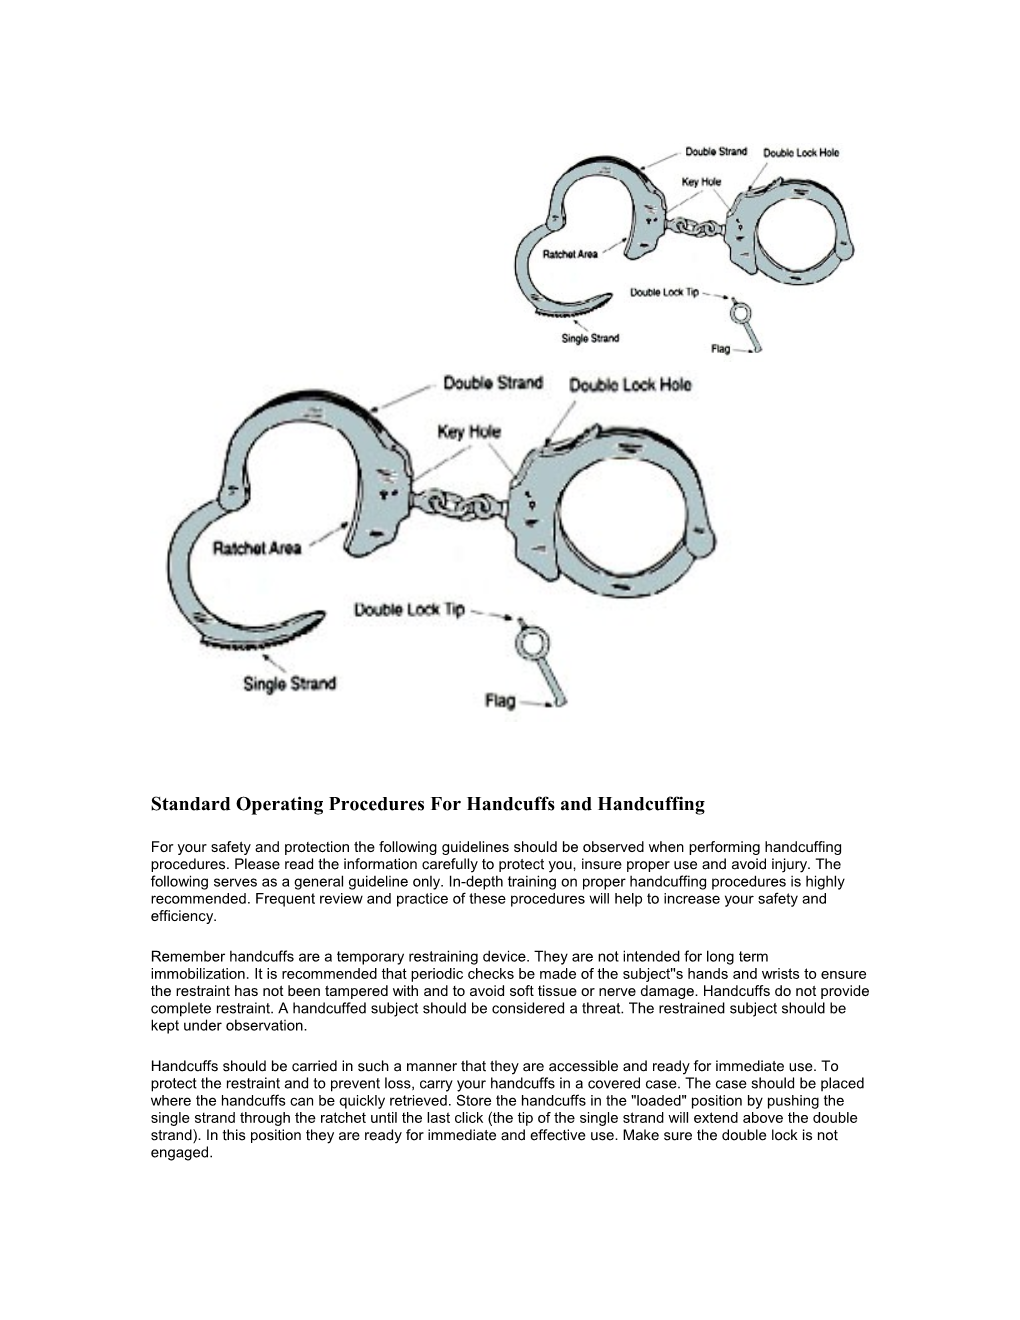 Standard Operating Procedures for Handcuffs and Handcuffing